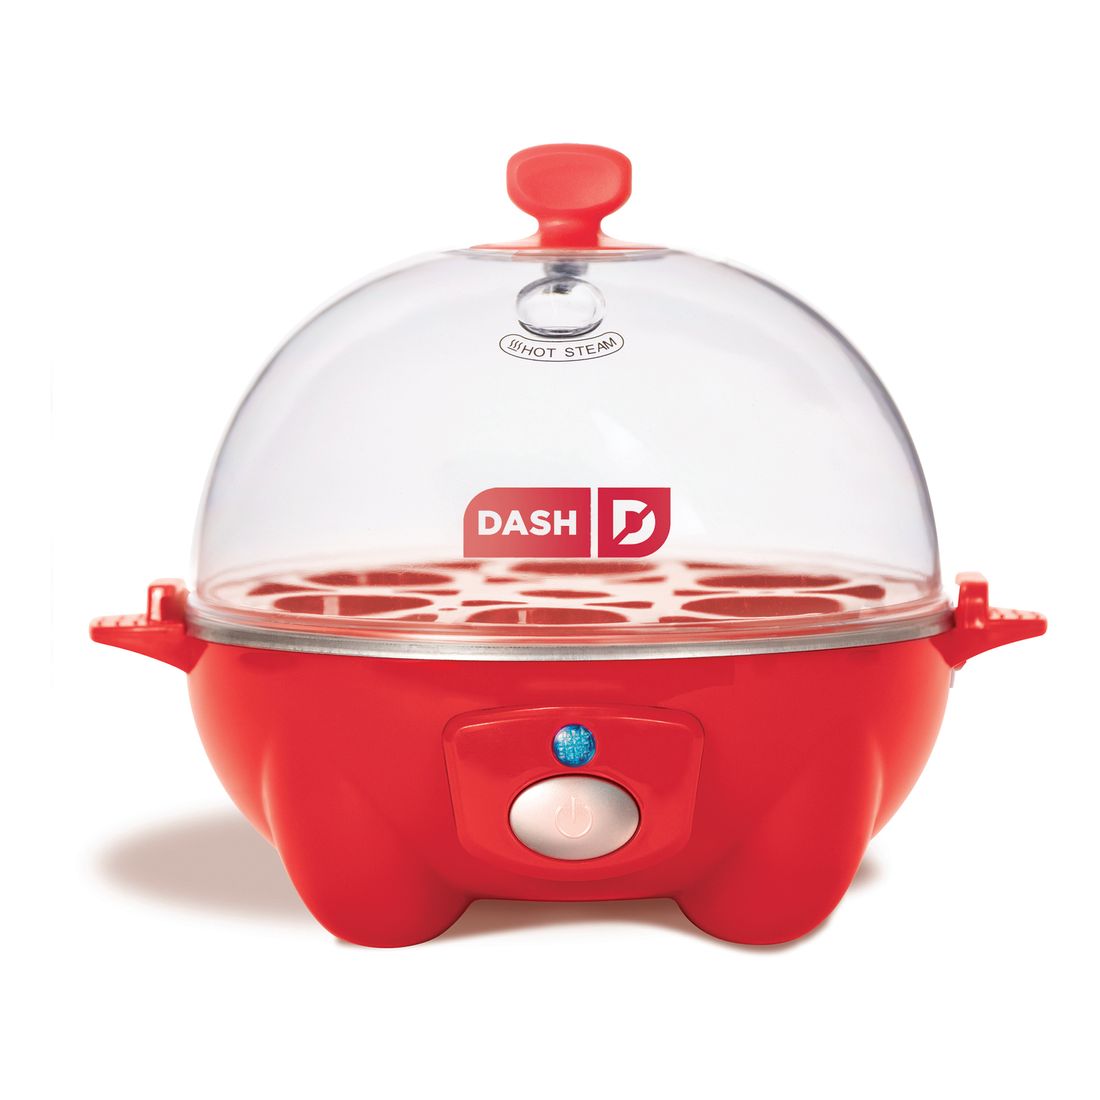 Dash Rapid Cooker Red (6 Eggs)